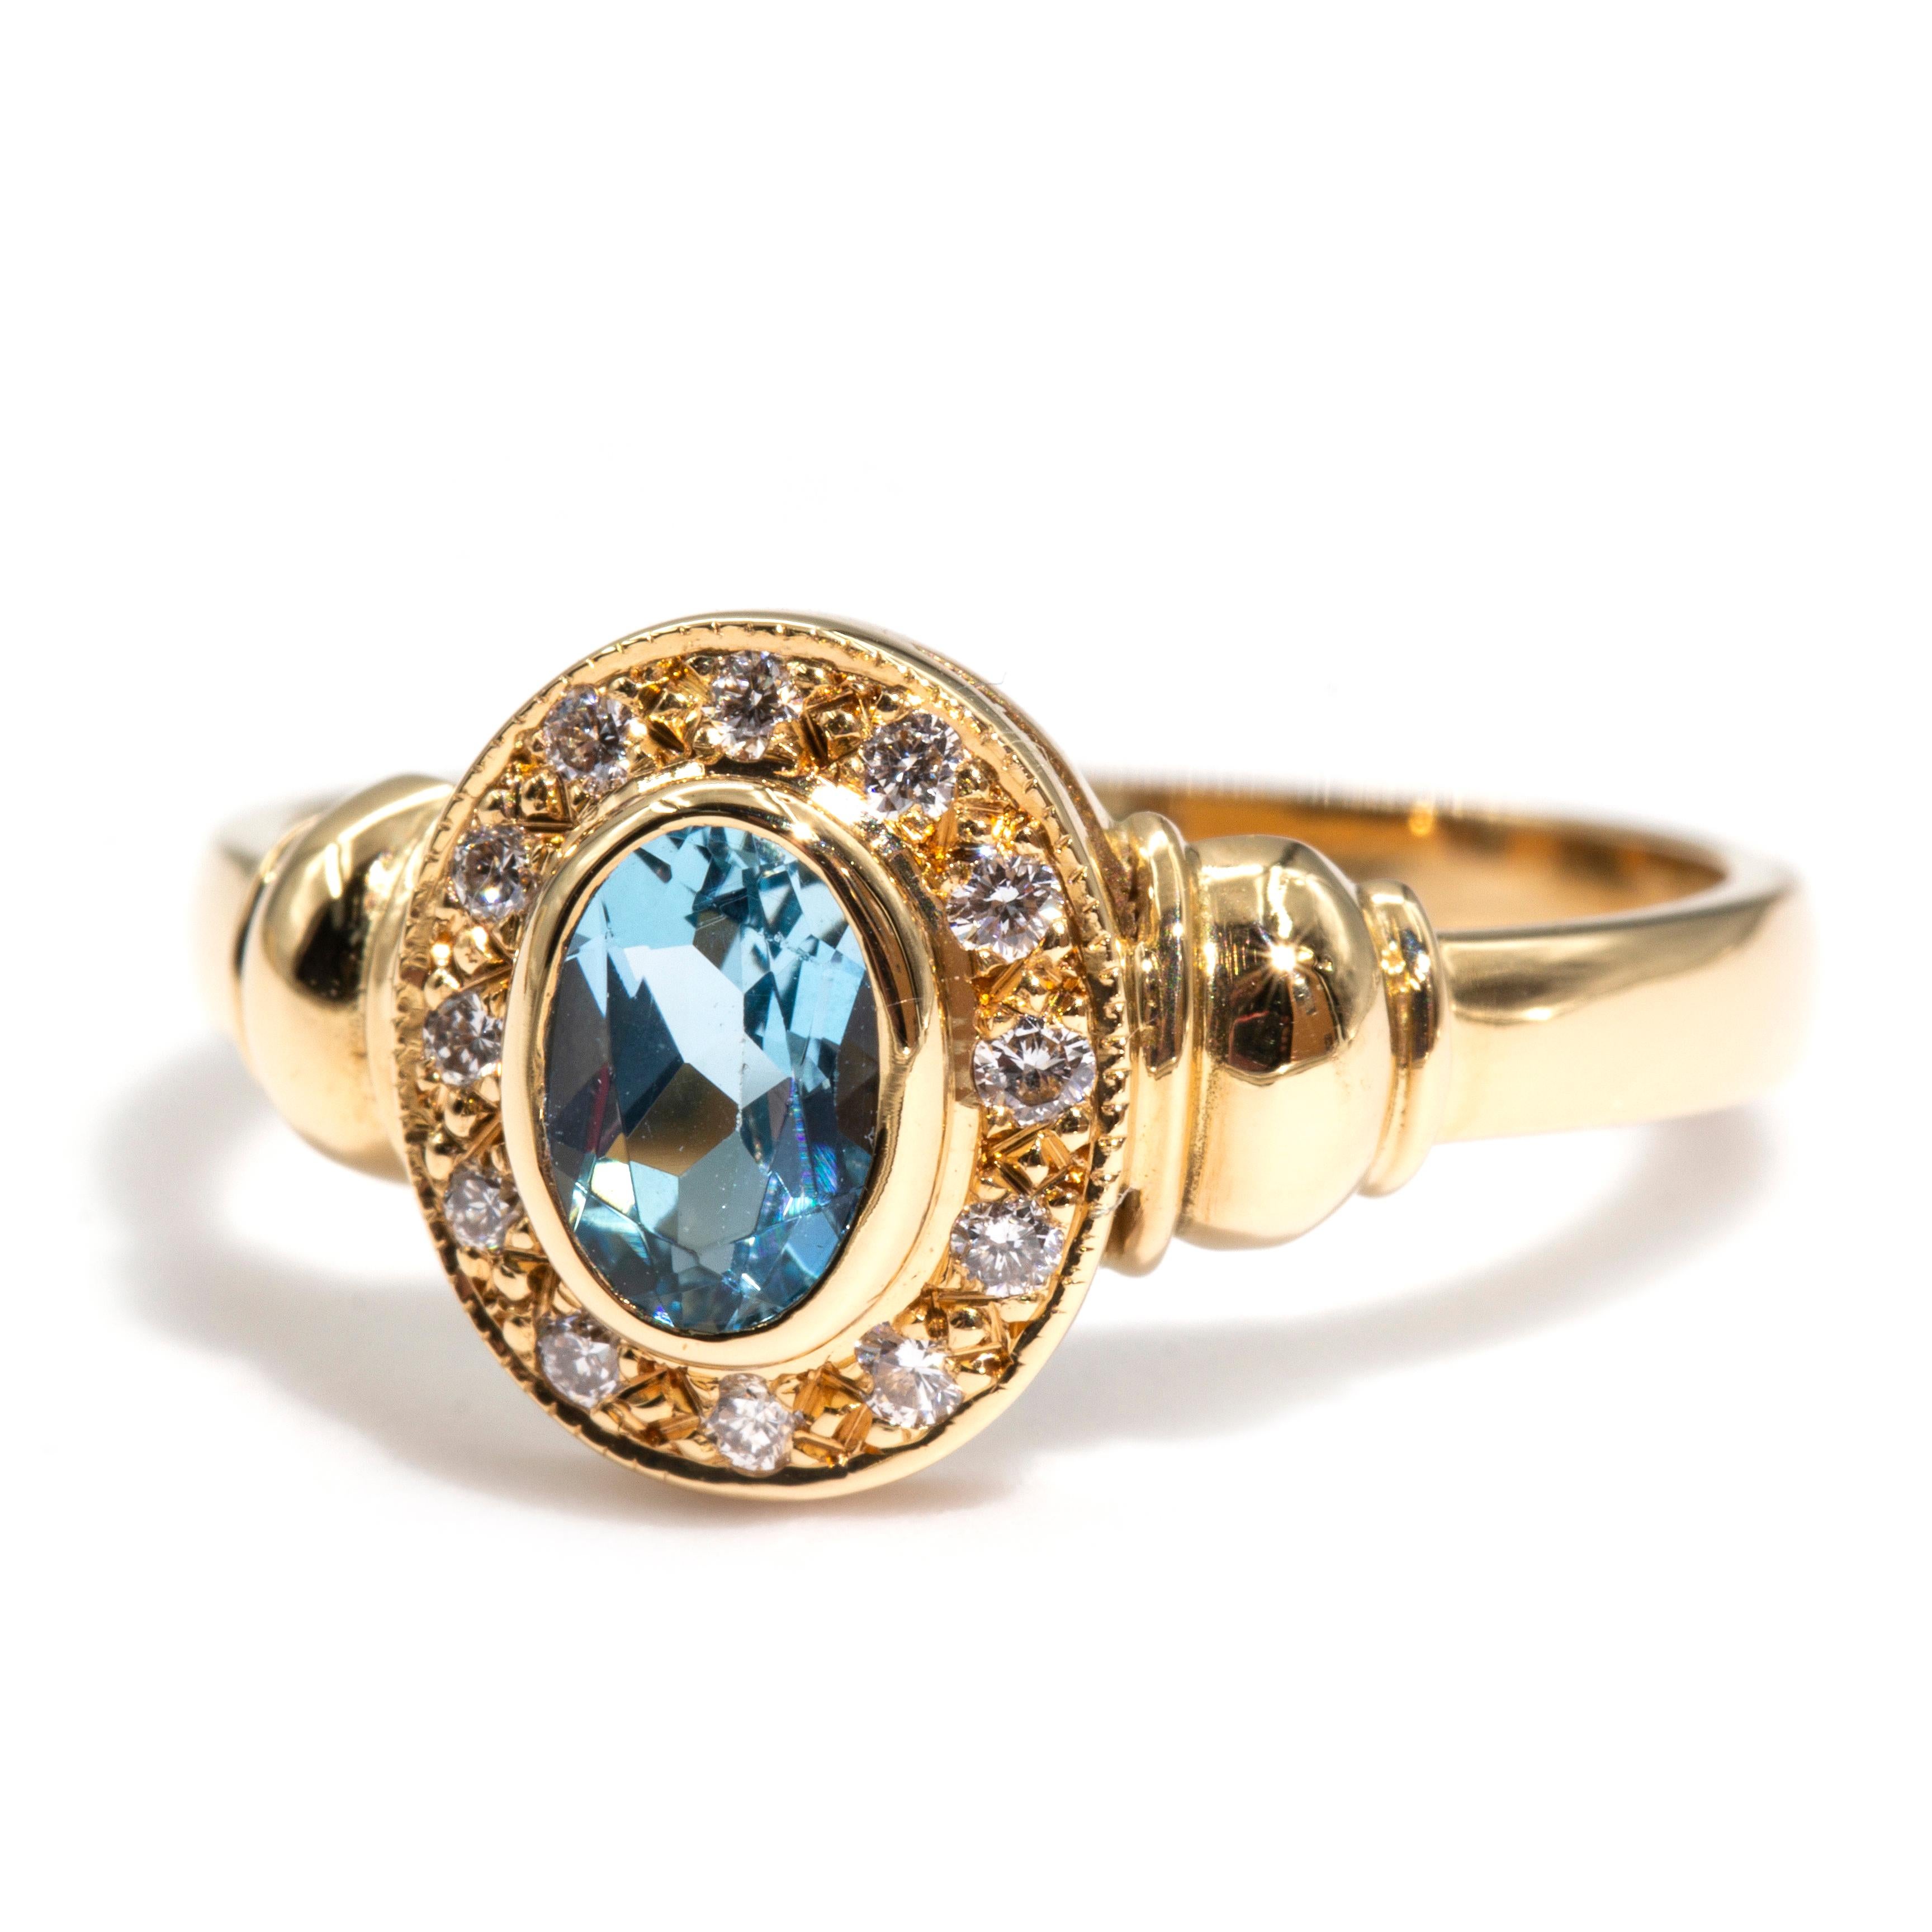 Crafted in 18 carat yellow gold is this charming vintage cluster ring that features a lovely blue oval aquamarine and is surrounded by a halo of sparking round brilliant cut diamonds. We have named this vintage splendour The Scarlett Ring. The